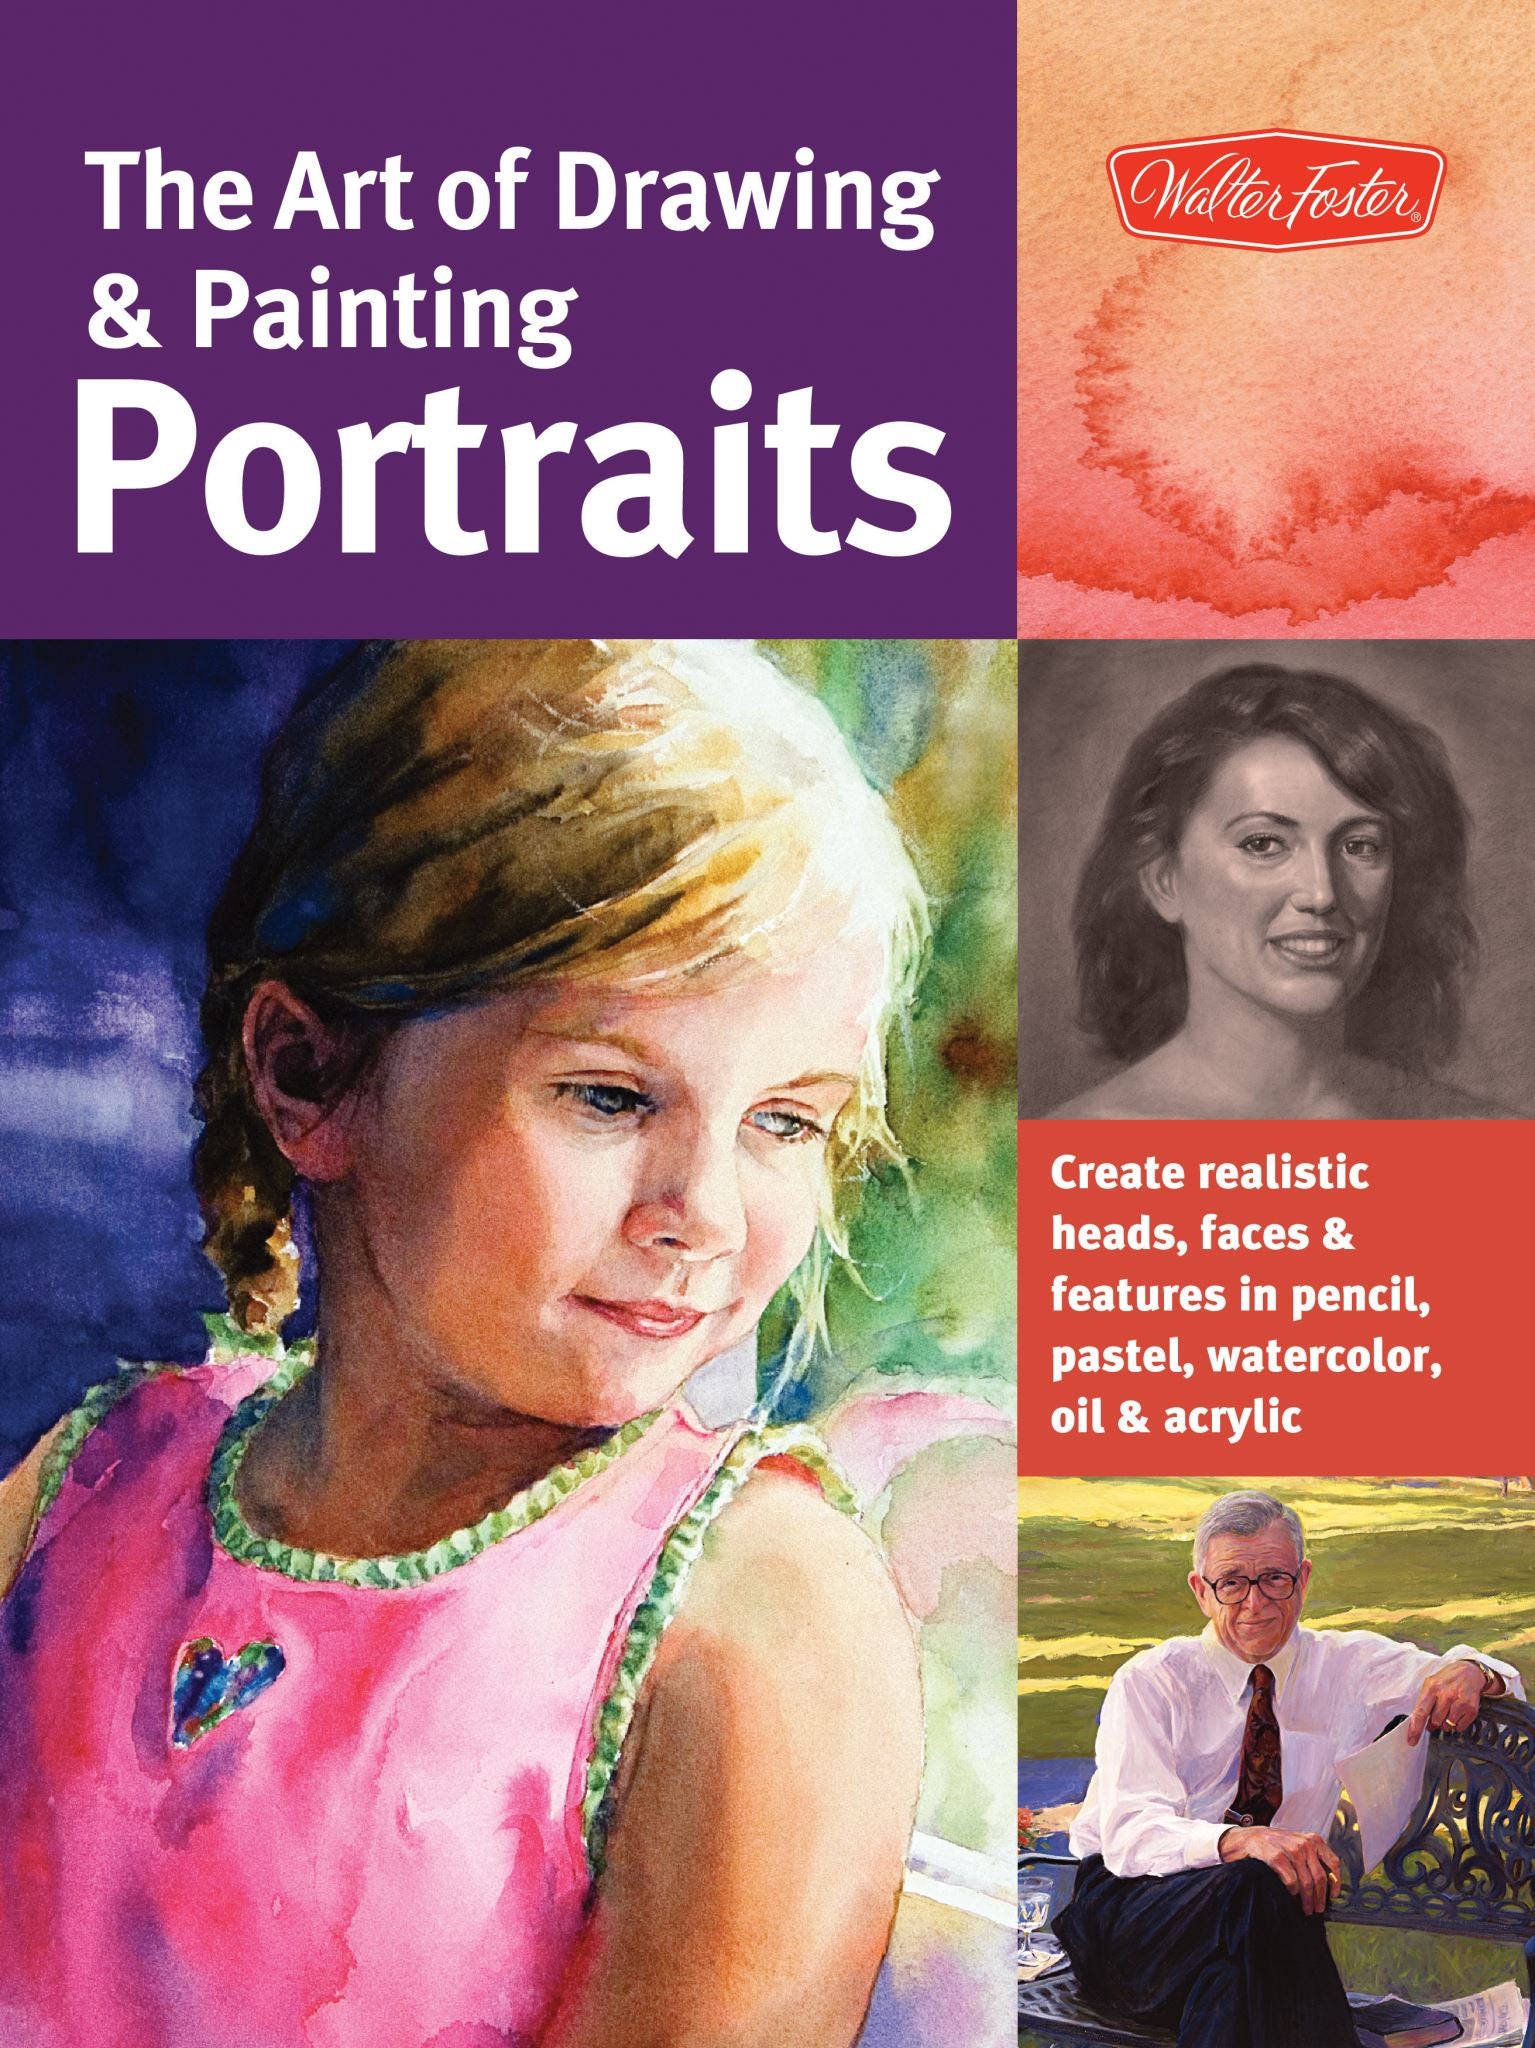 The Art of Drawing & Painting Portraits (Collector's Series)